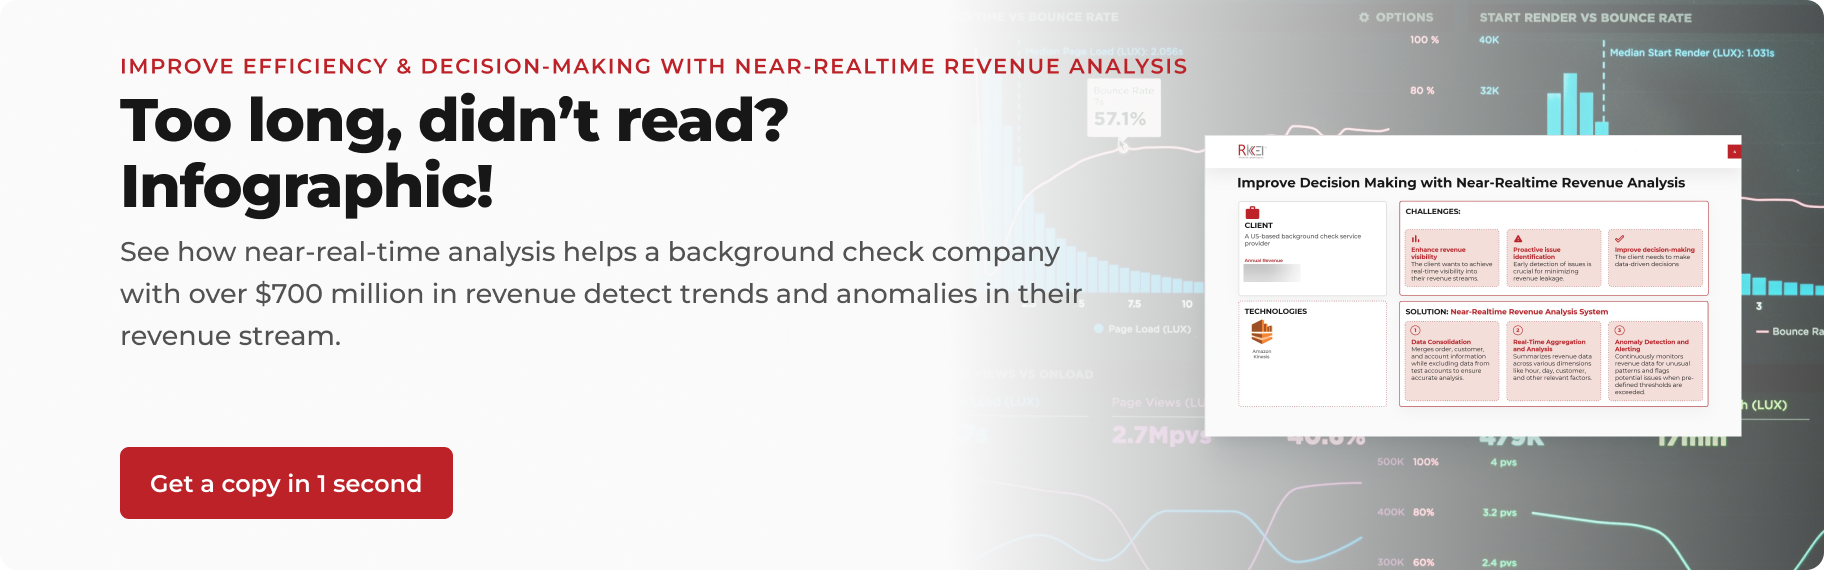 Improve Efficiency And Decision Making With Near Realtime Revenue Analysis 1